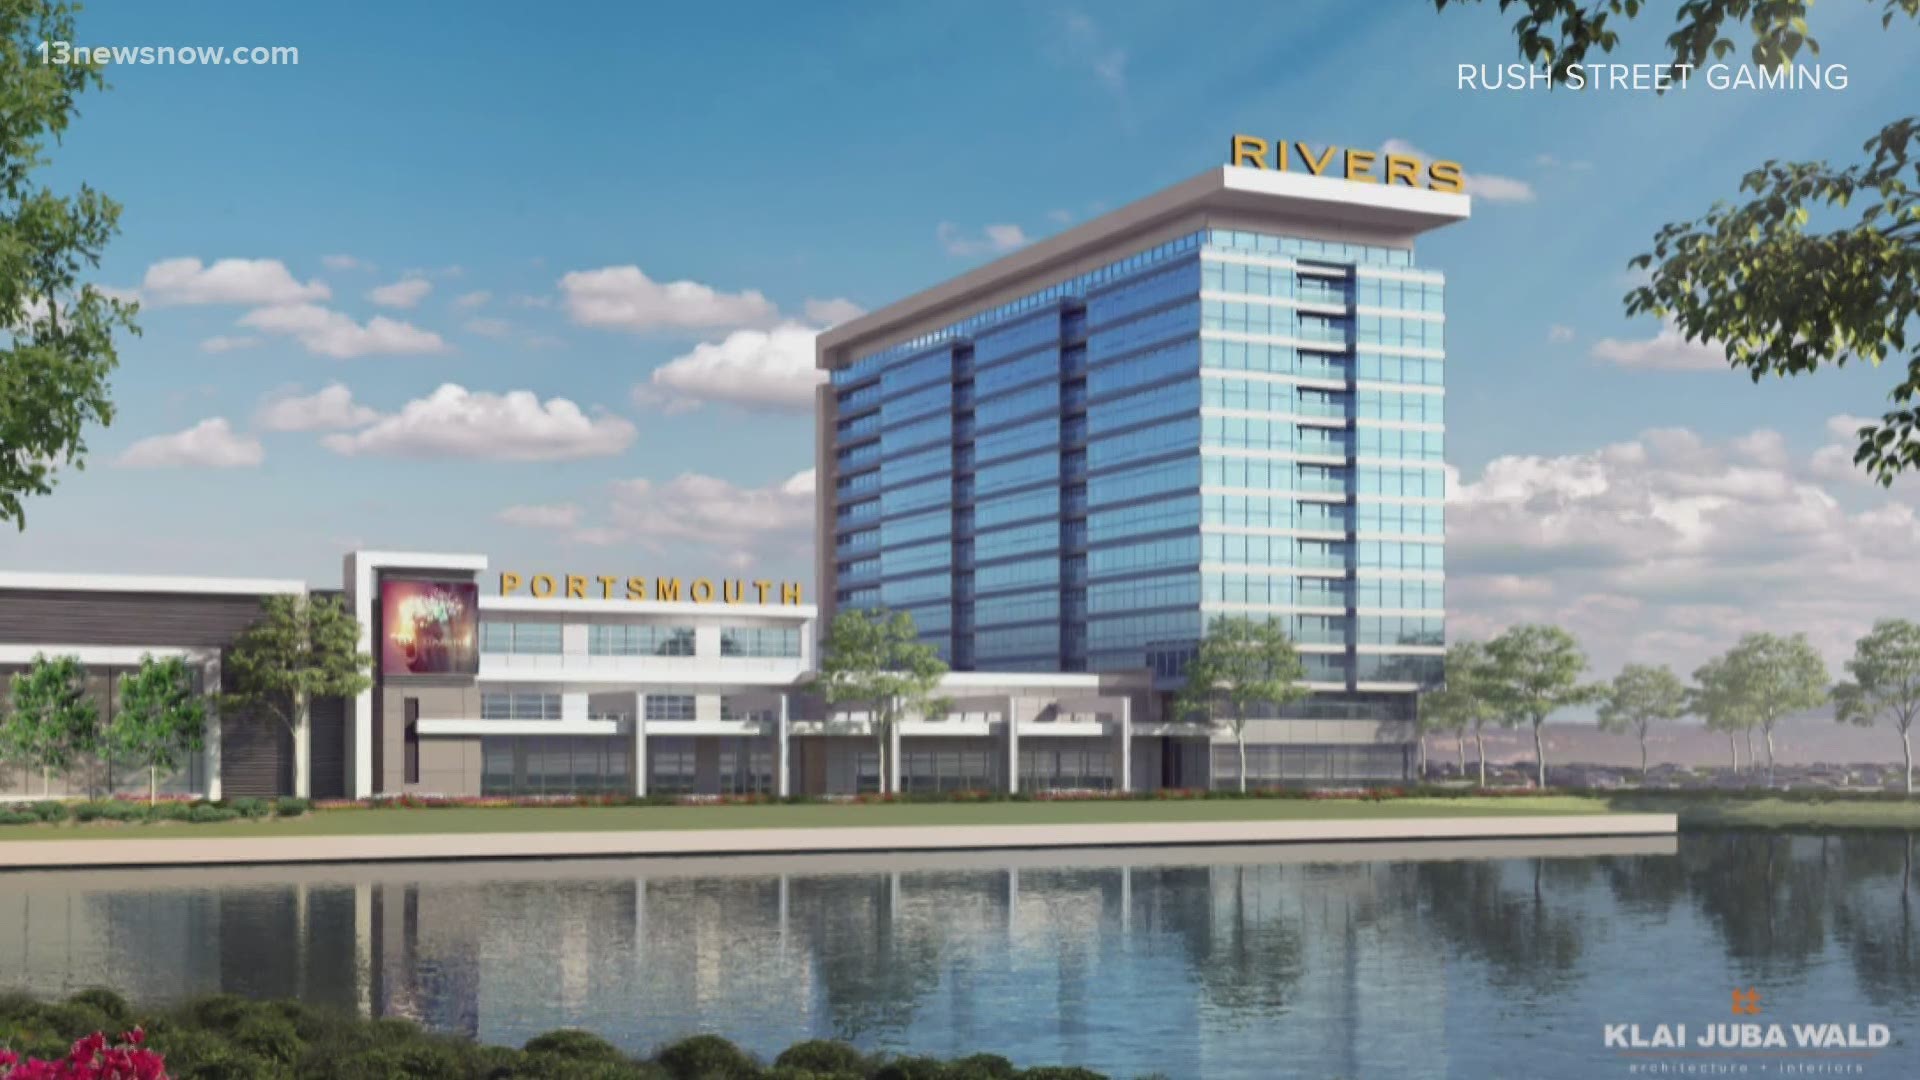 We're learning more about the future of the Rivers Casino Project in Portsmouth.